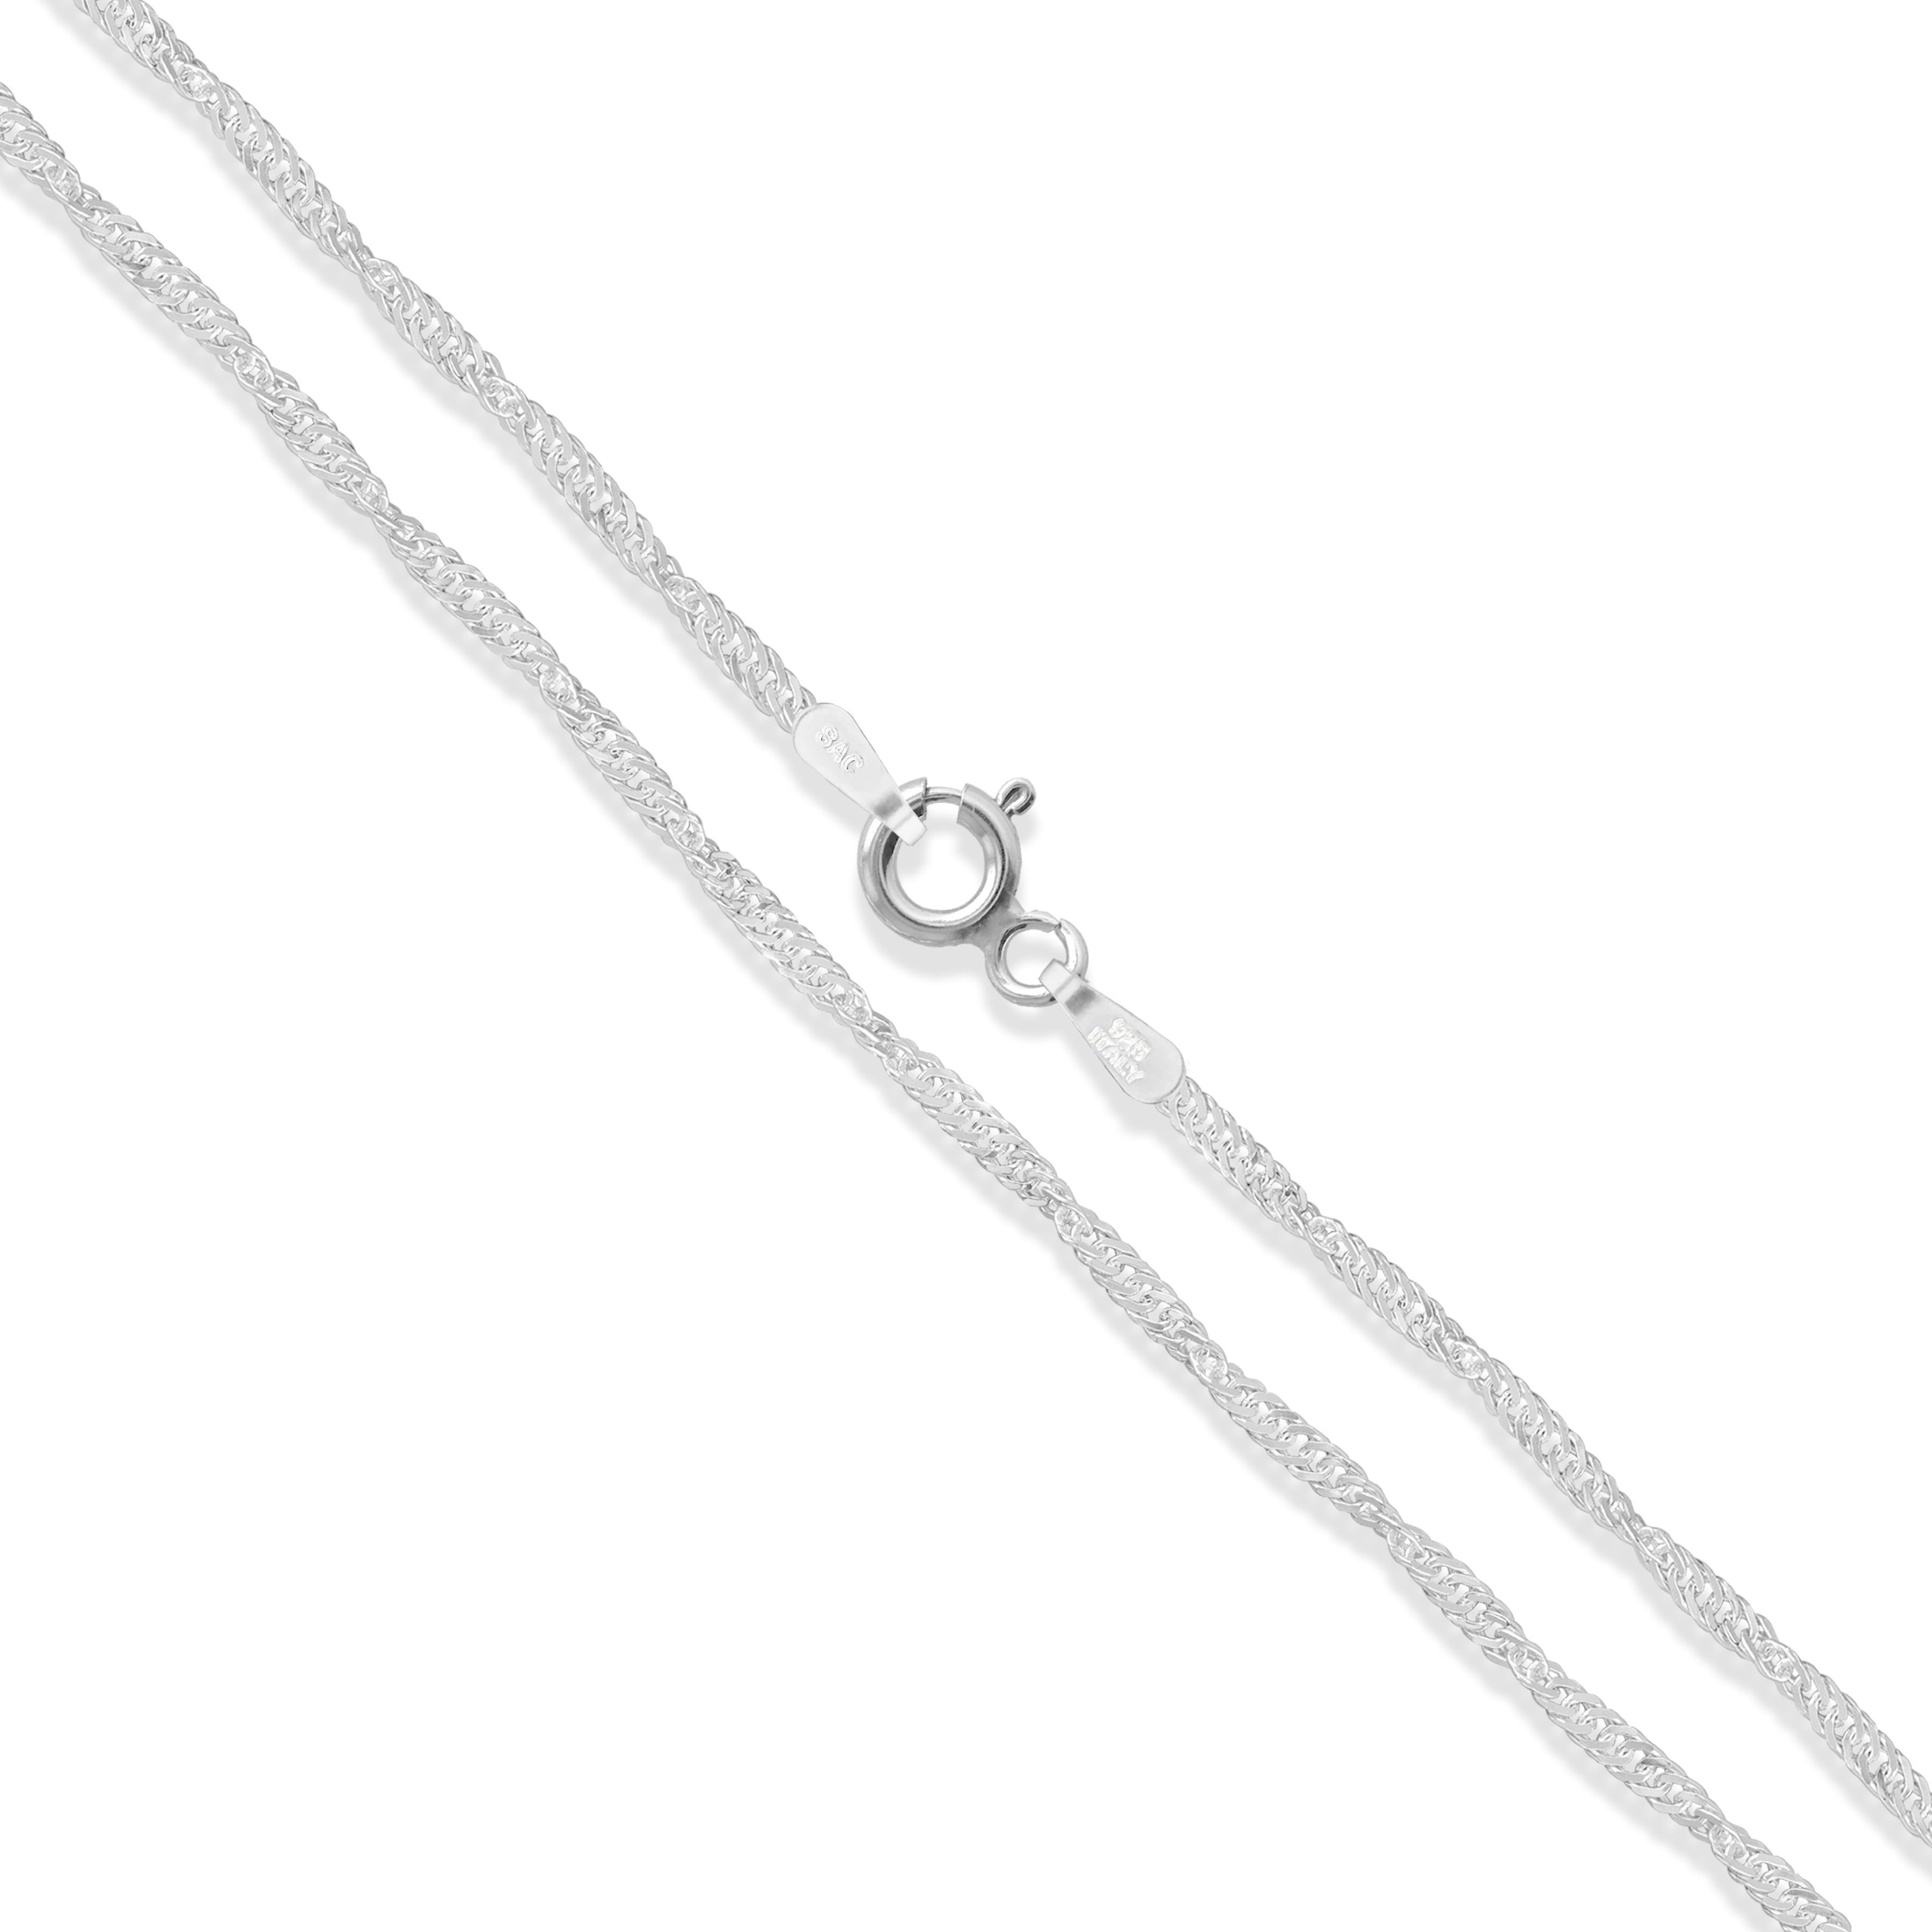 Necklace Chain Extender, 3.4mm Curb Links with Lobster Clasp 2 Inches,  Silver Plated (5 Pieces) 